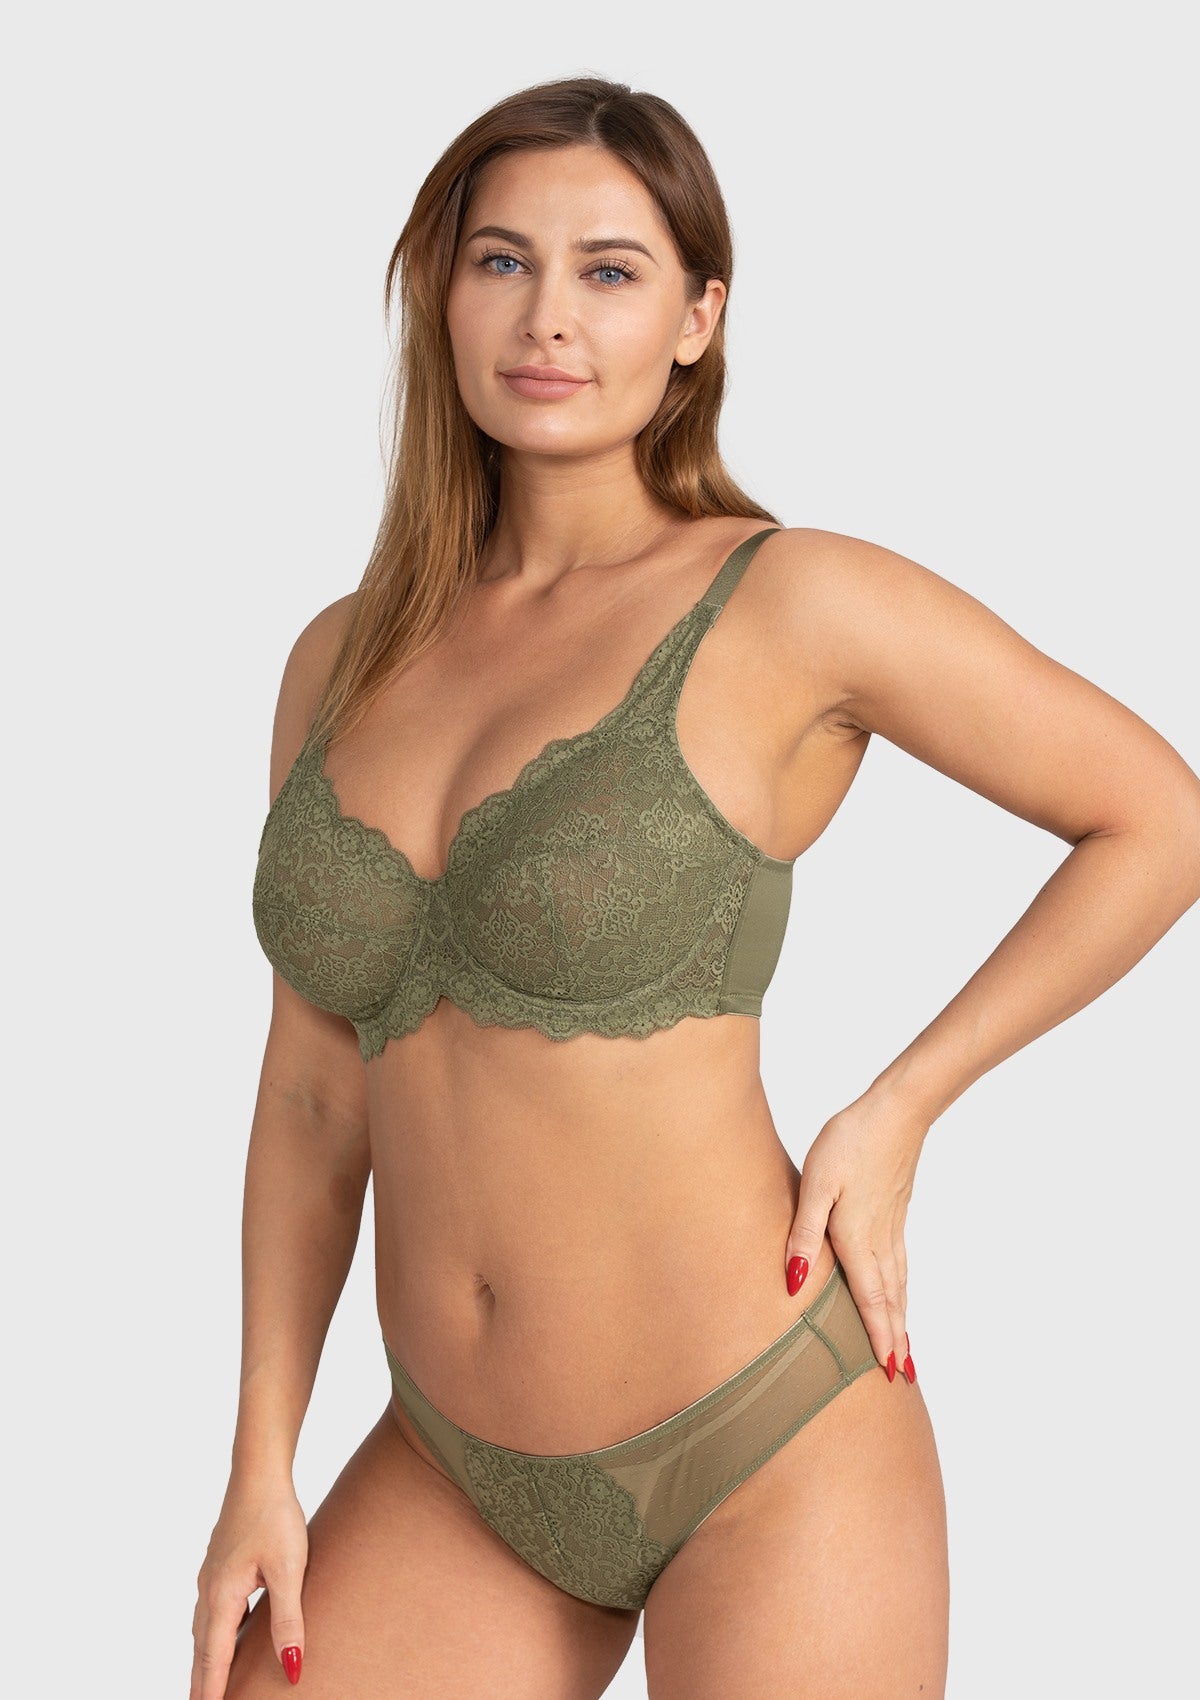 HSIA All-Over Floral Lace Unlined Bra: Minimizer Bra For Heavy Breasts - Dark Green / 44 / C